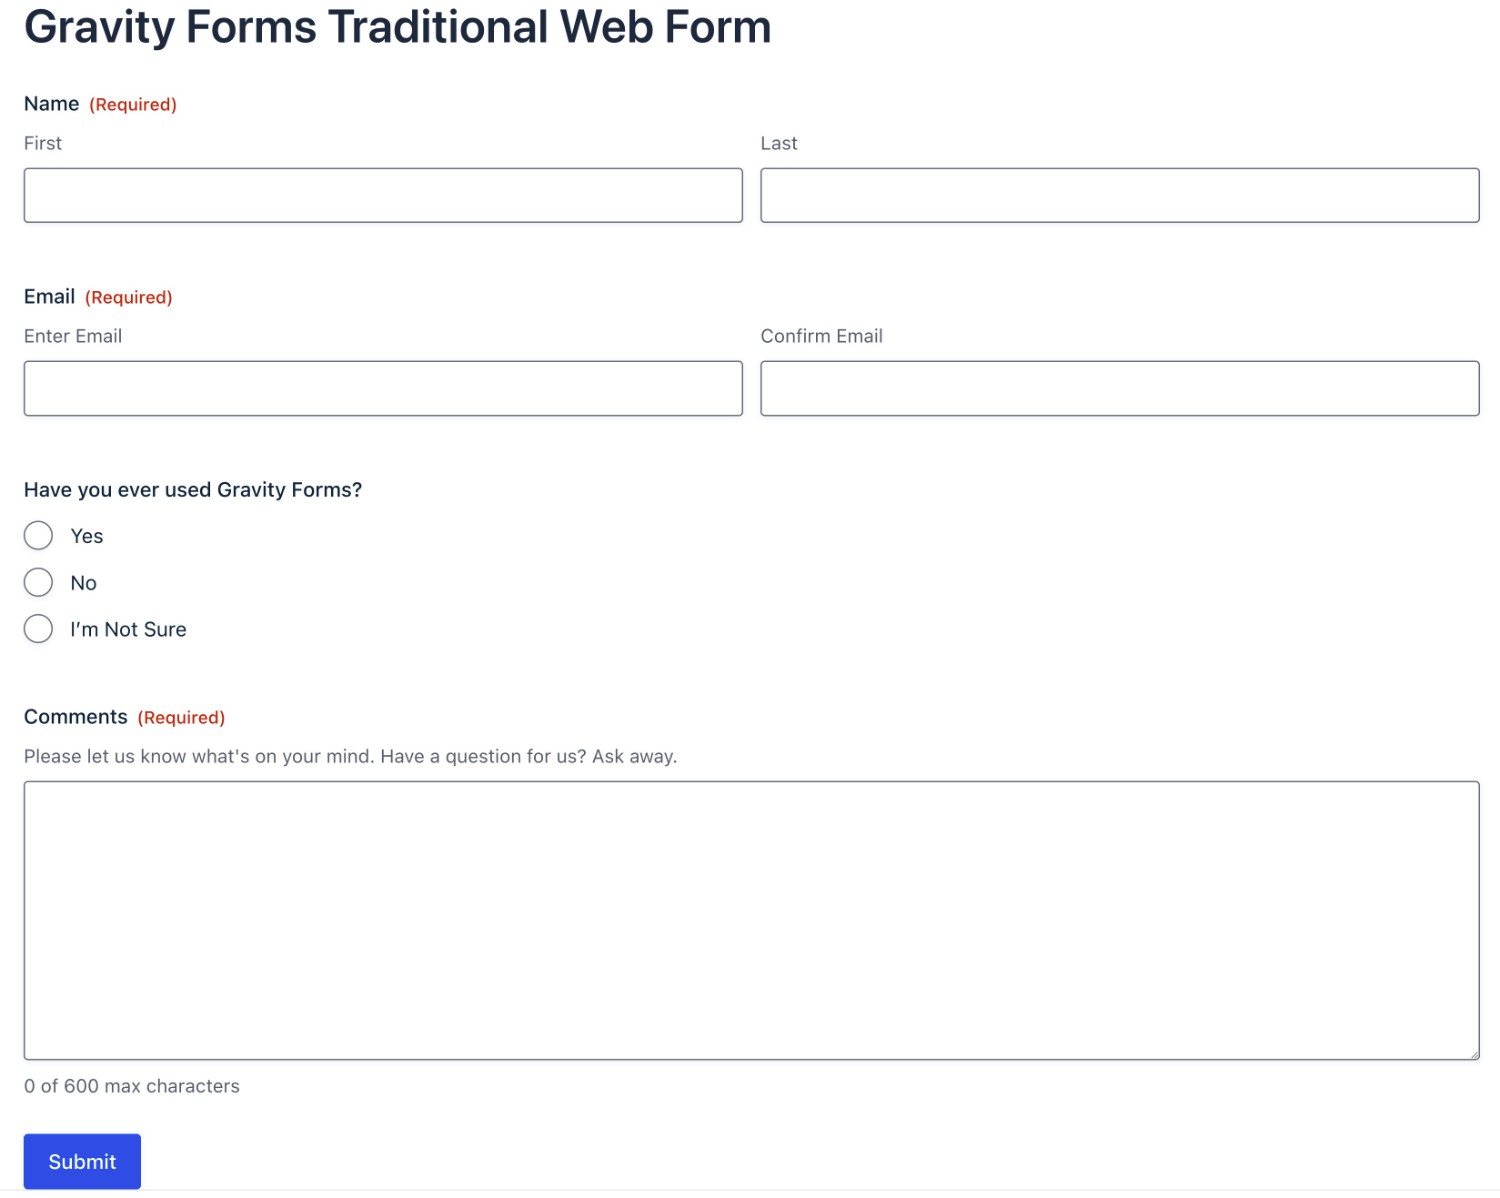 Gravity Forms web form example